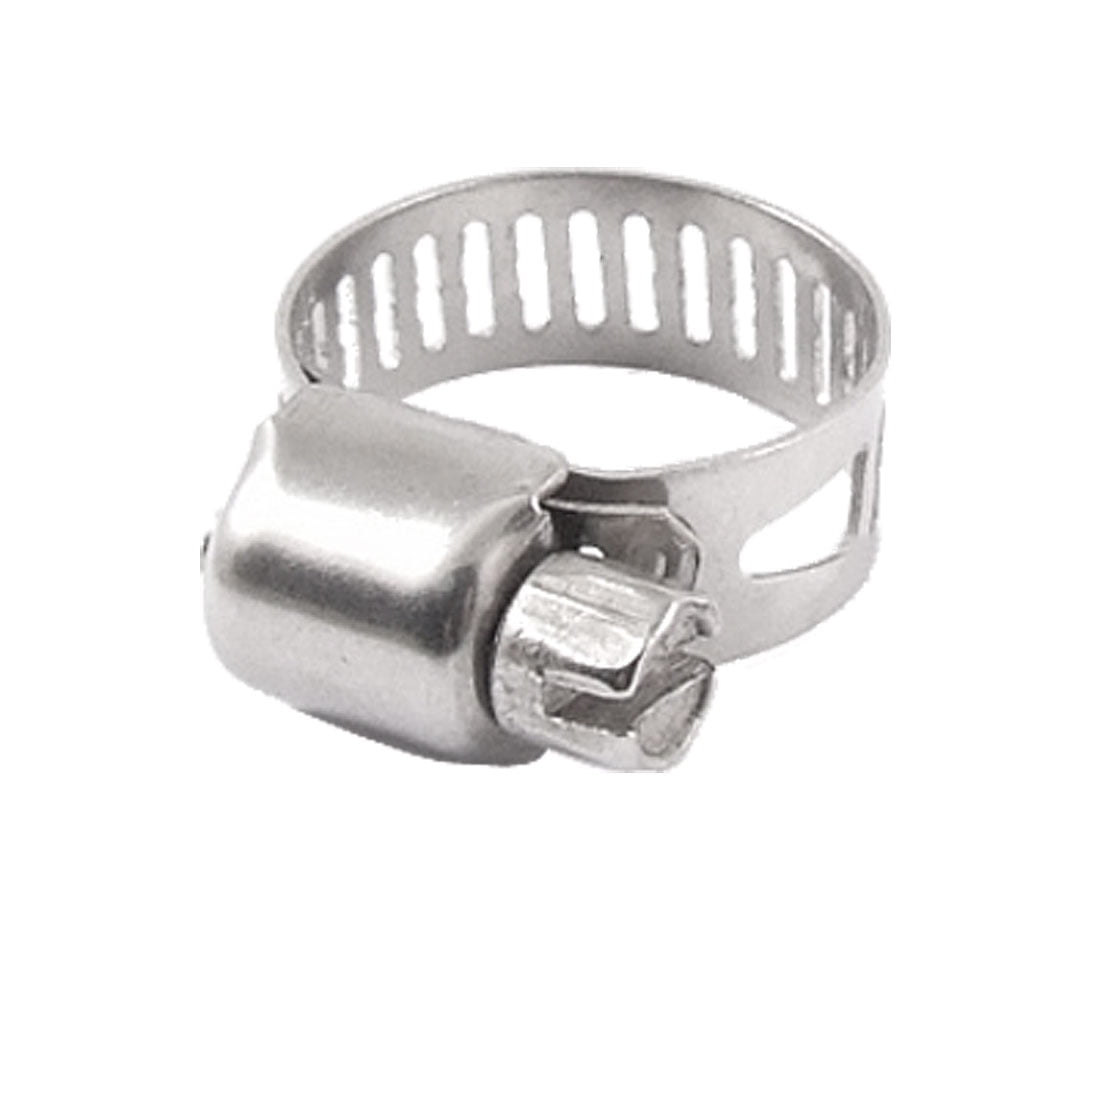 13-19mm Adjustable Stainless Steel Worm Gear Hose Clamps 